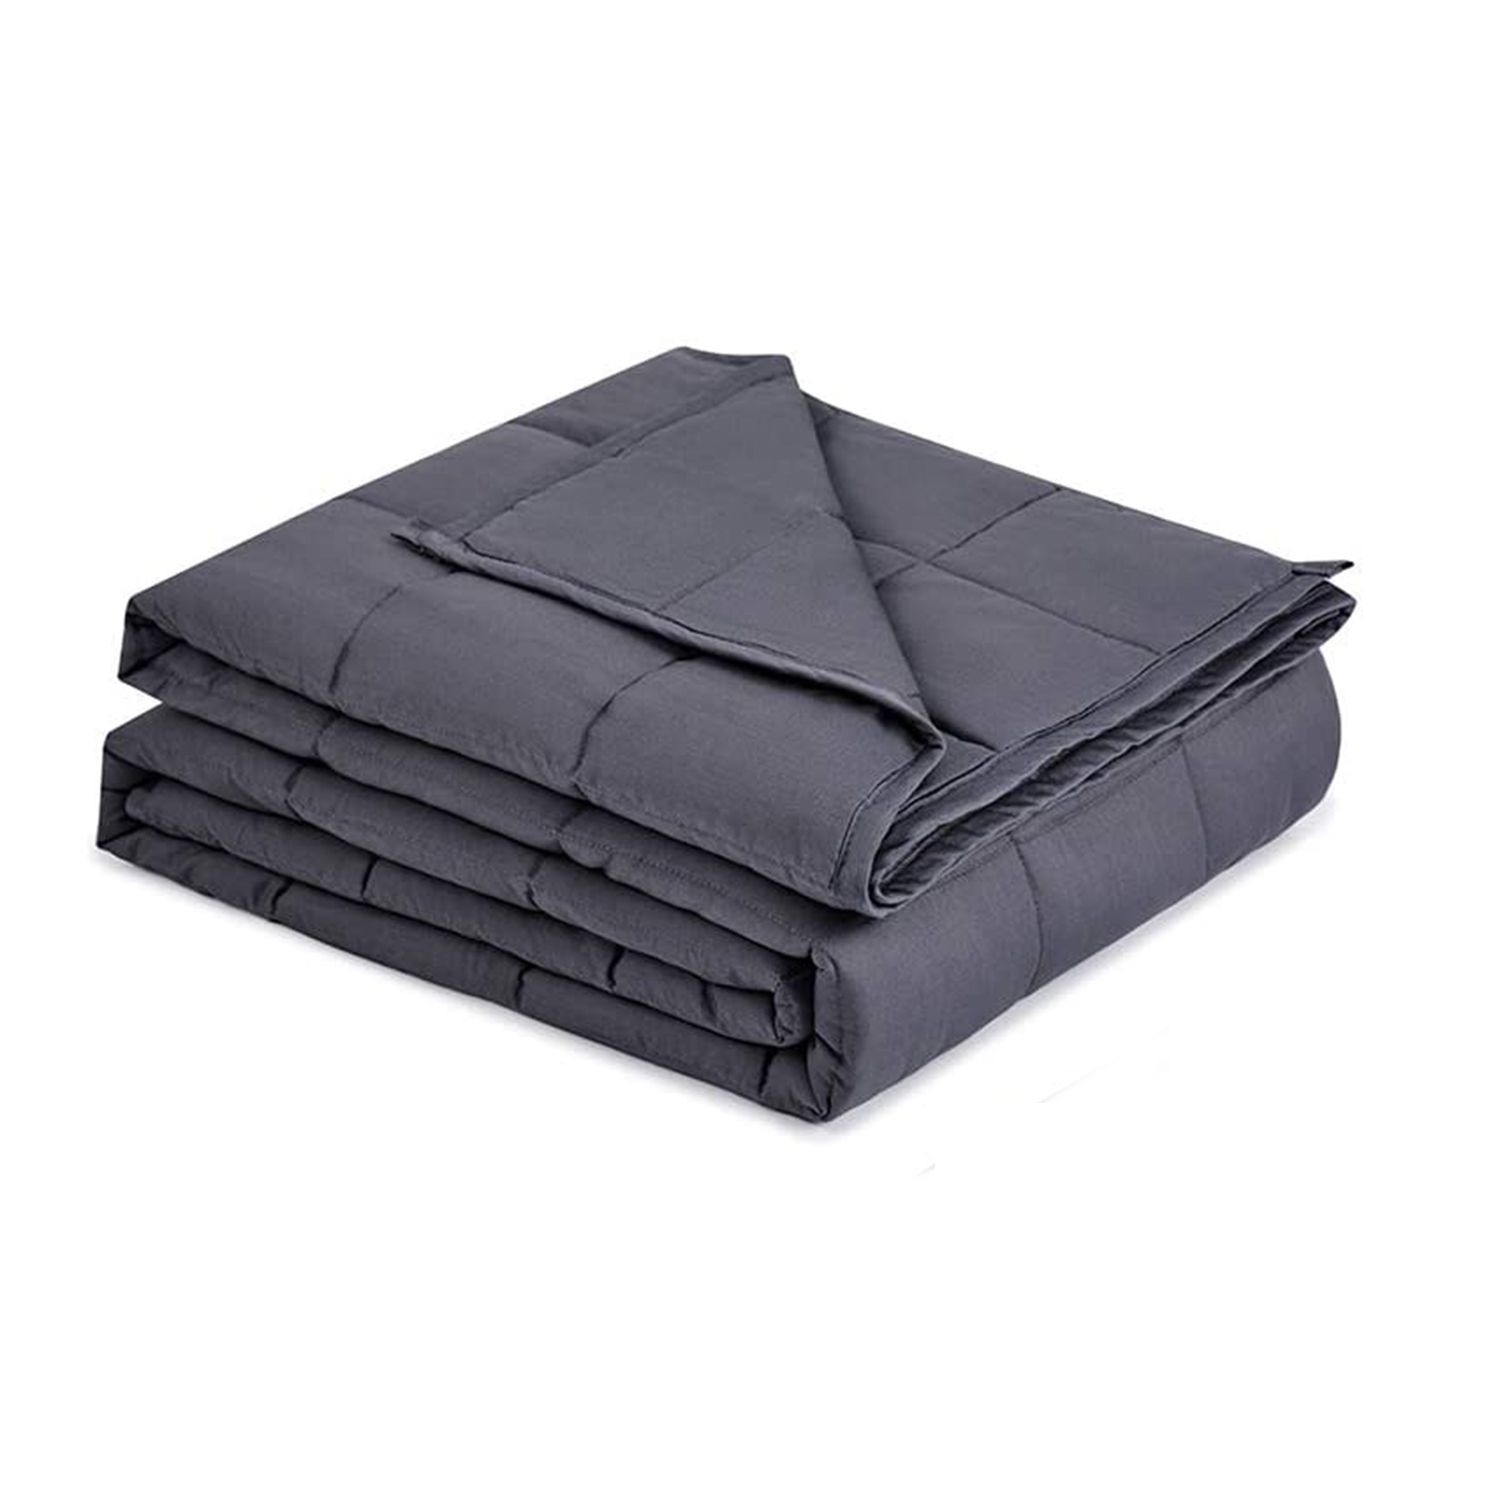 13 Best Cooling Weighted Blankets of 2021, According to Reviews | Real